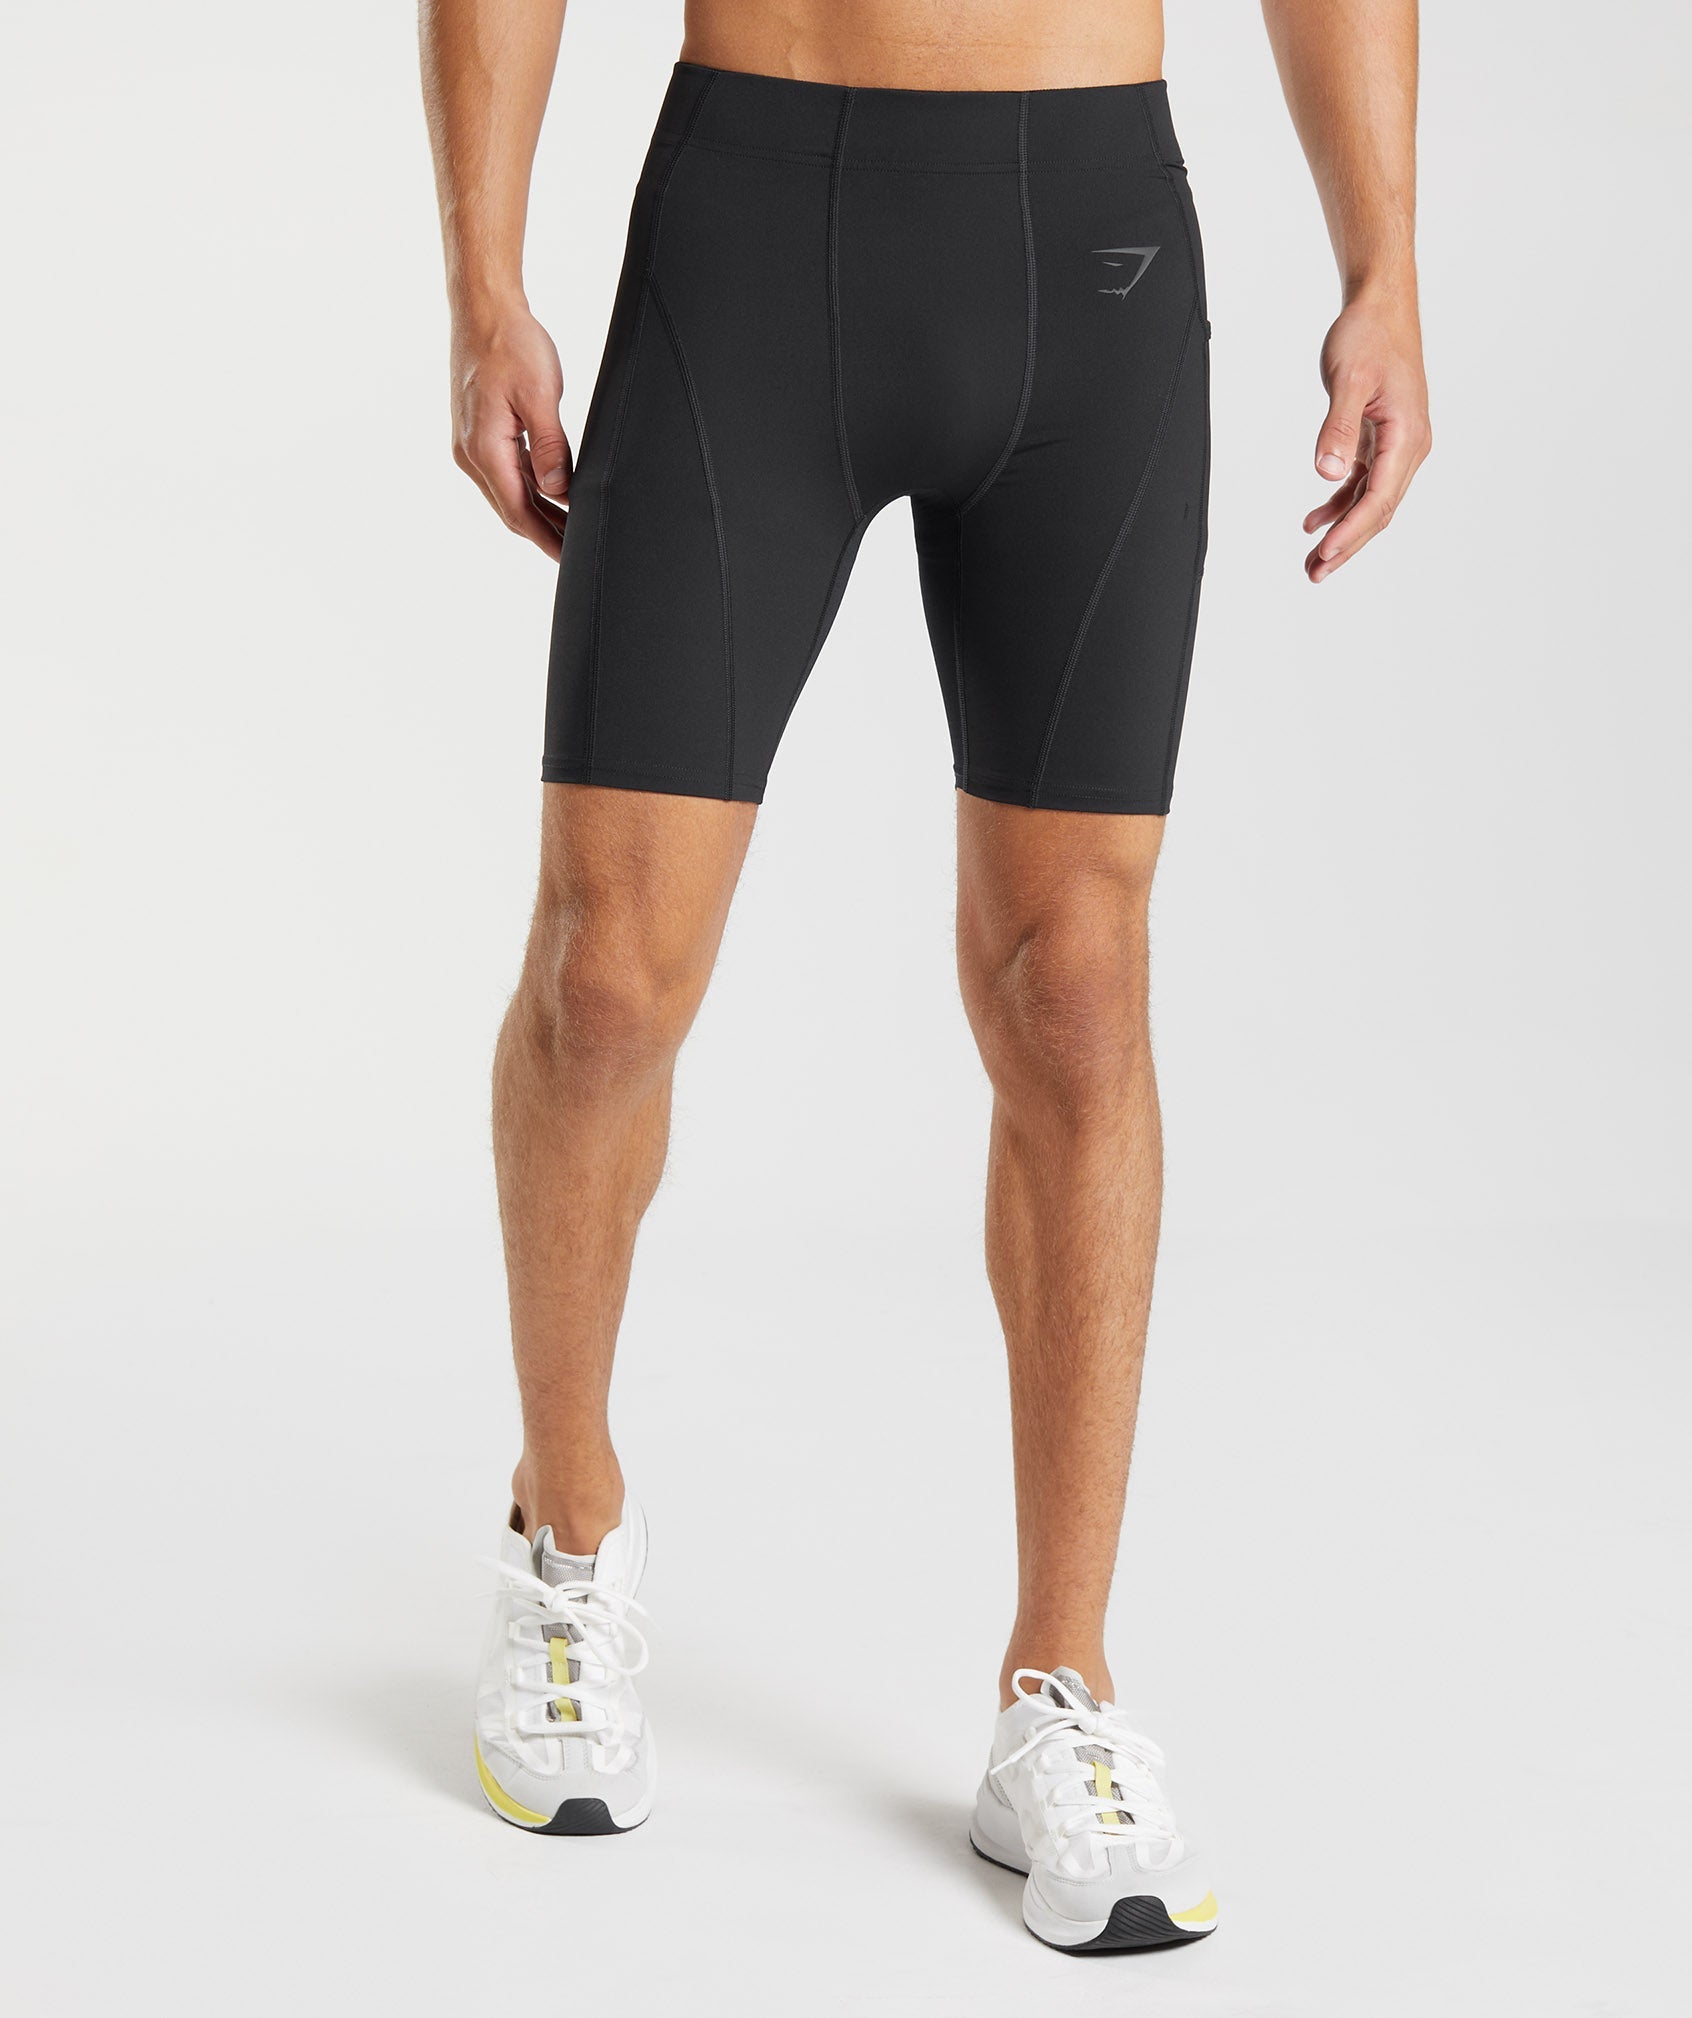 Control Baselayer Shorts in Black - view 1